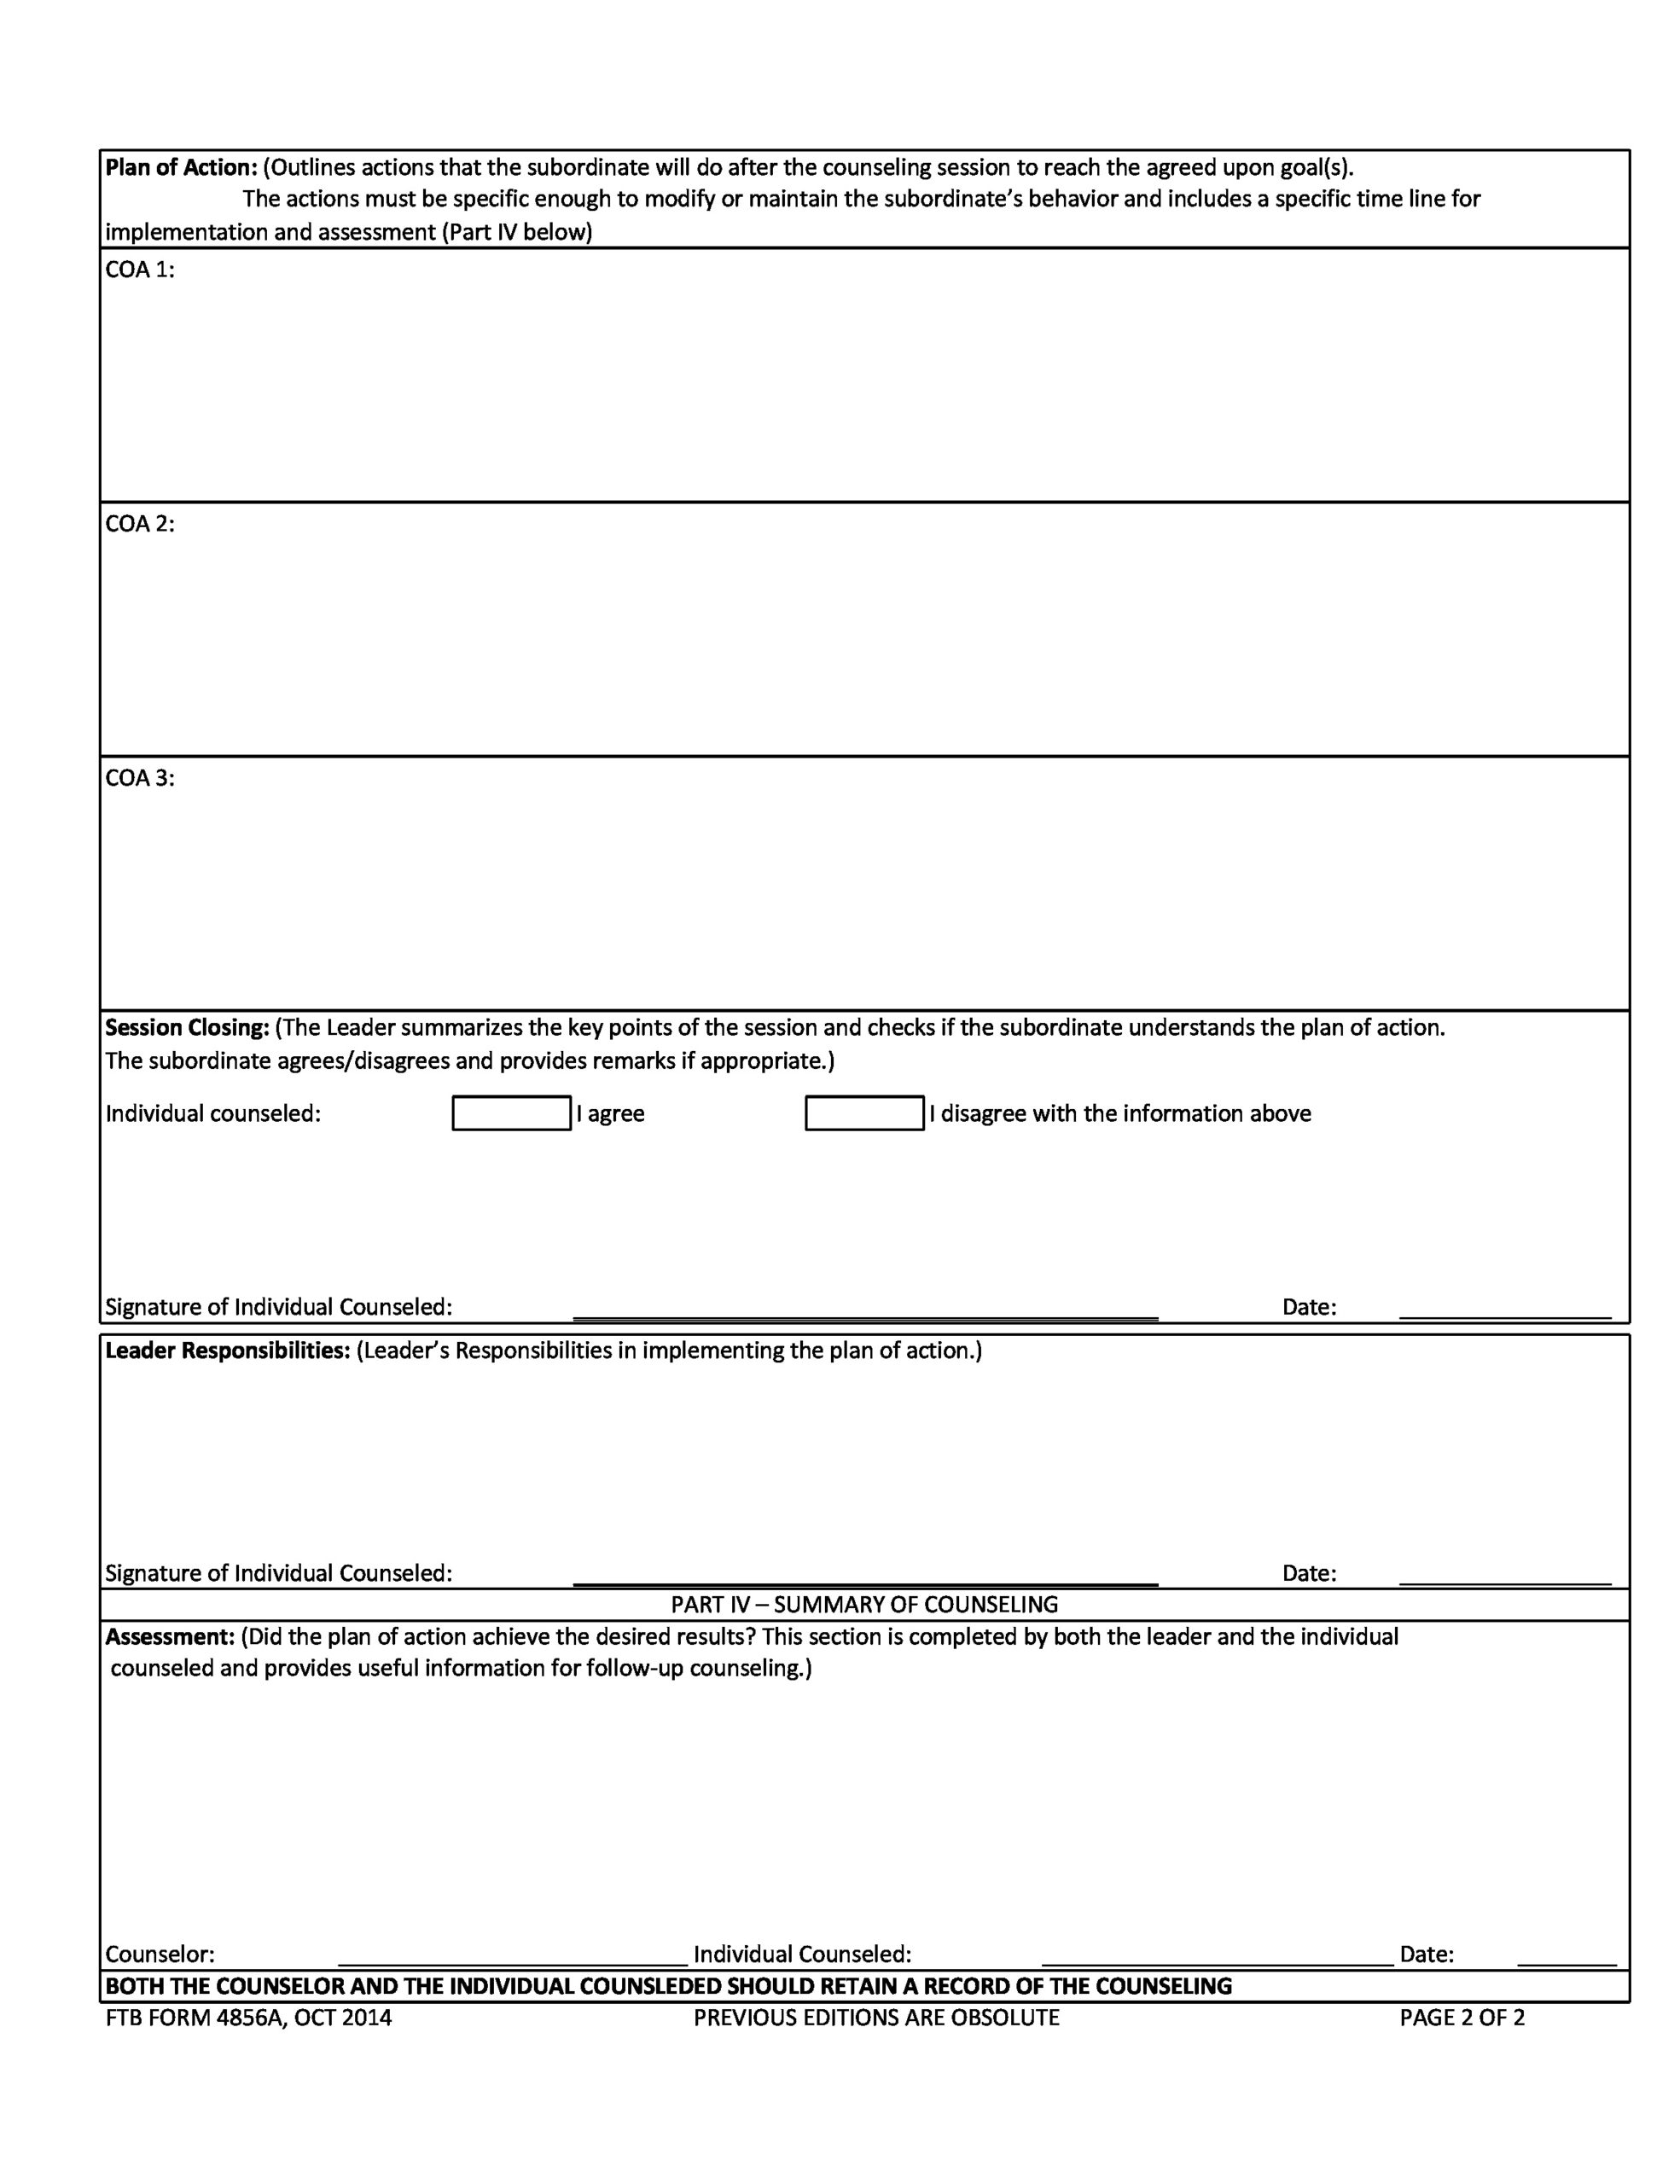 Free army counseling form 06